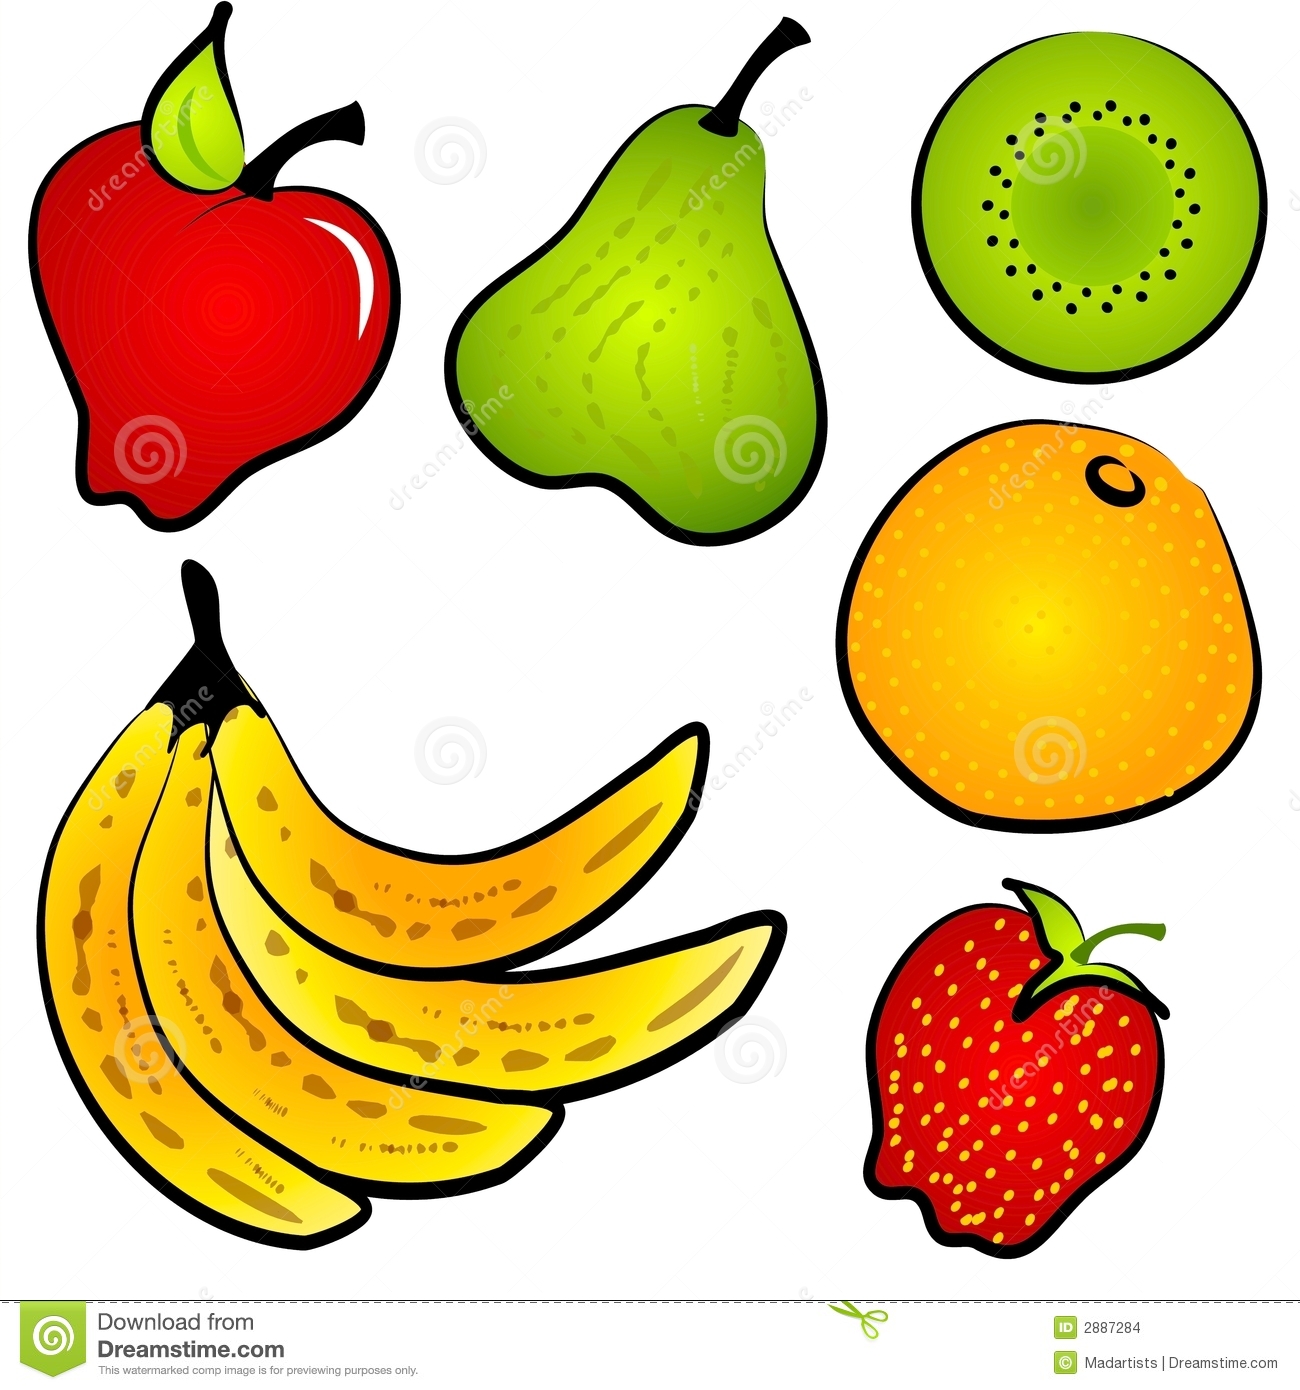 Clip Art Collection Of Health - Food Images Clip Art